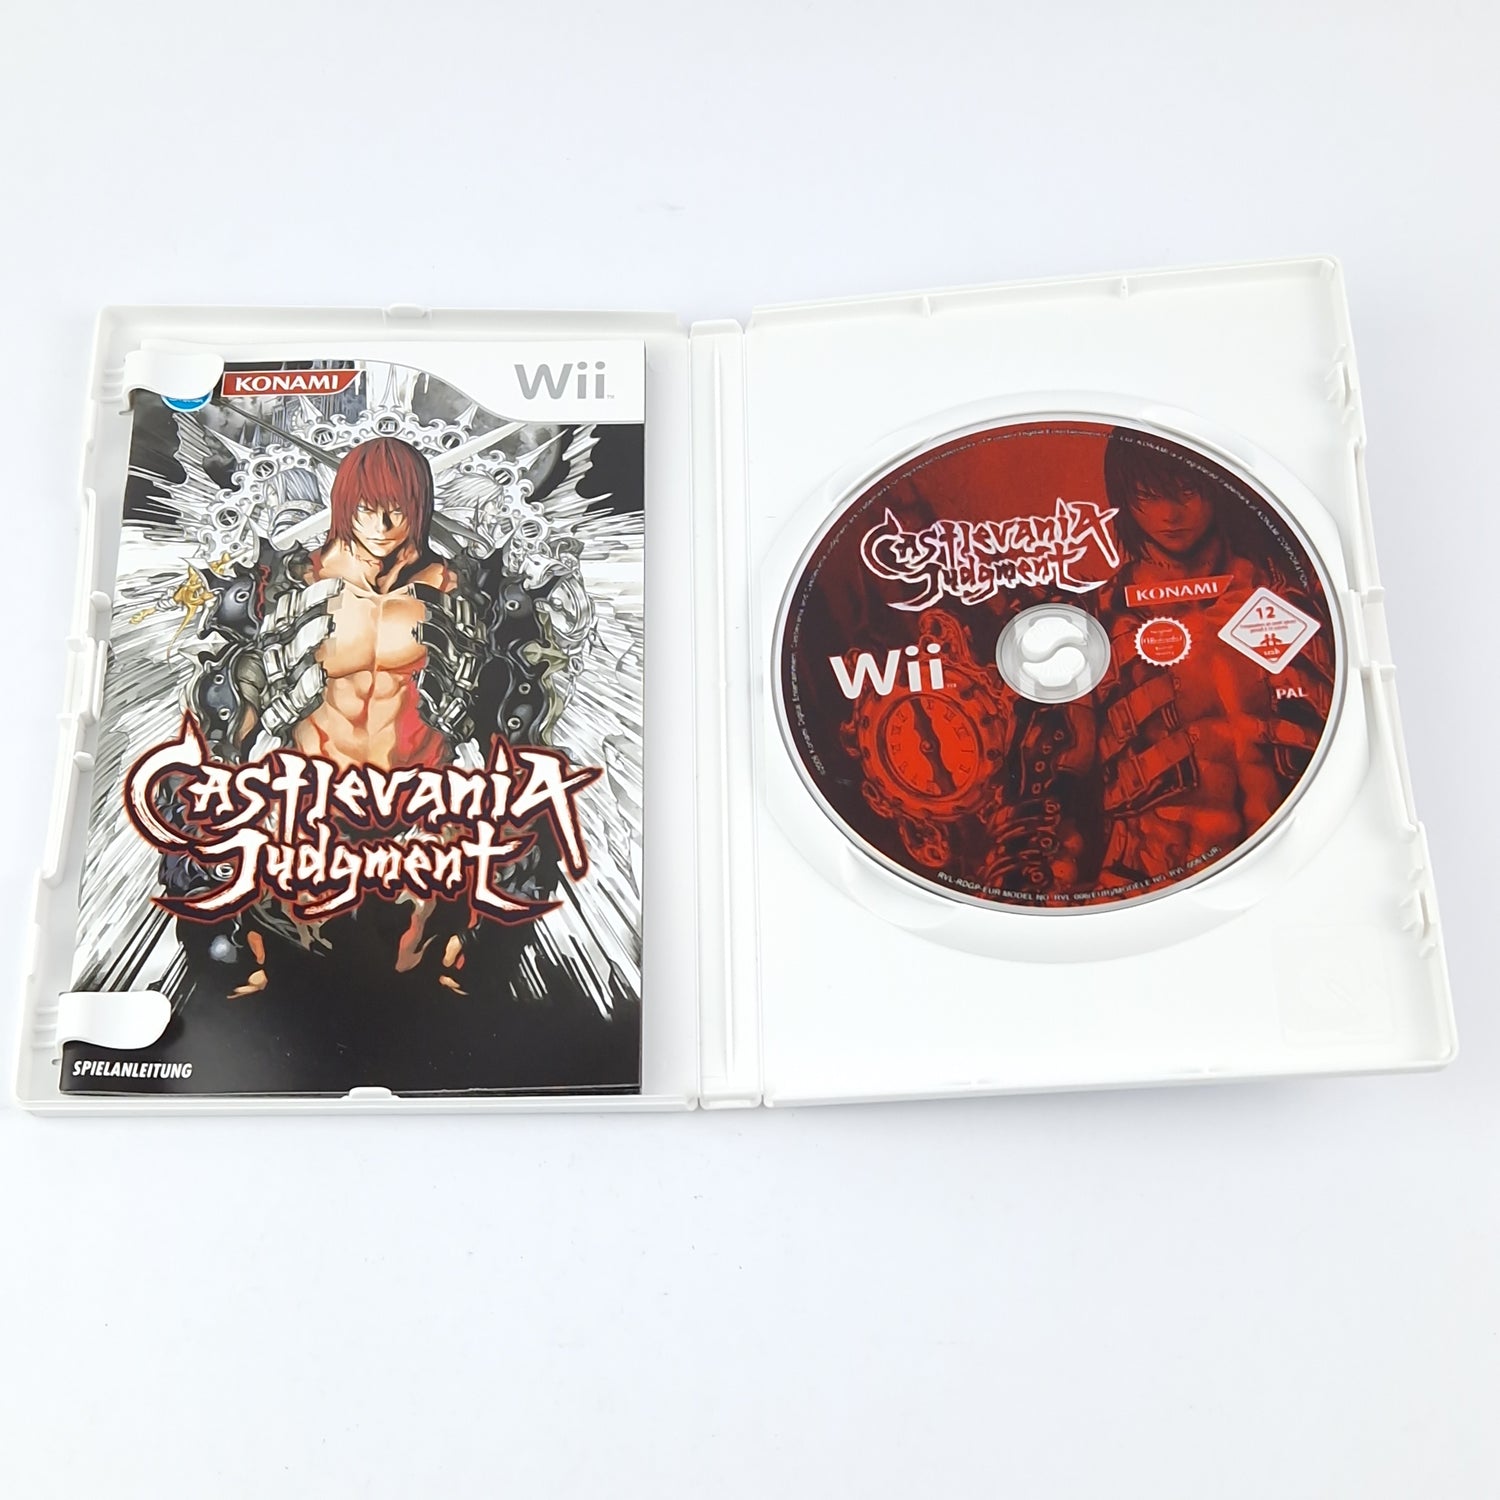 Nintendo Wii Game: Castlevania Judgment - OVP Instructions CD Pal Disk 